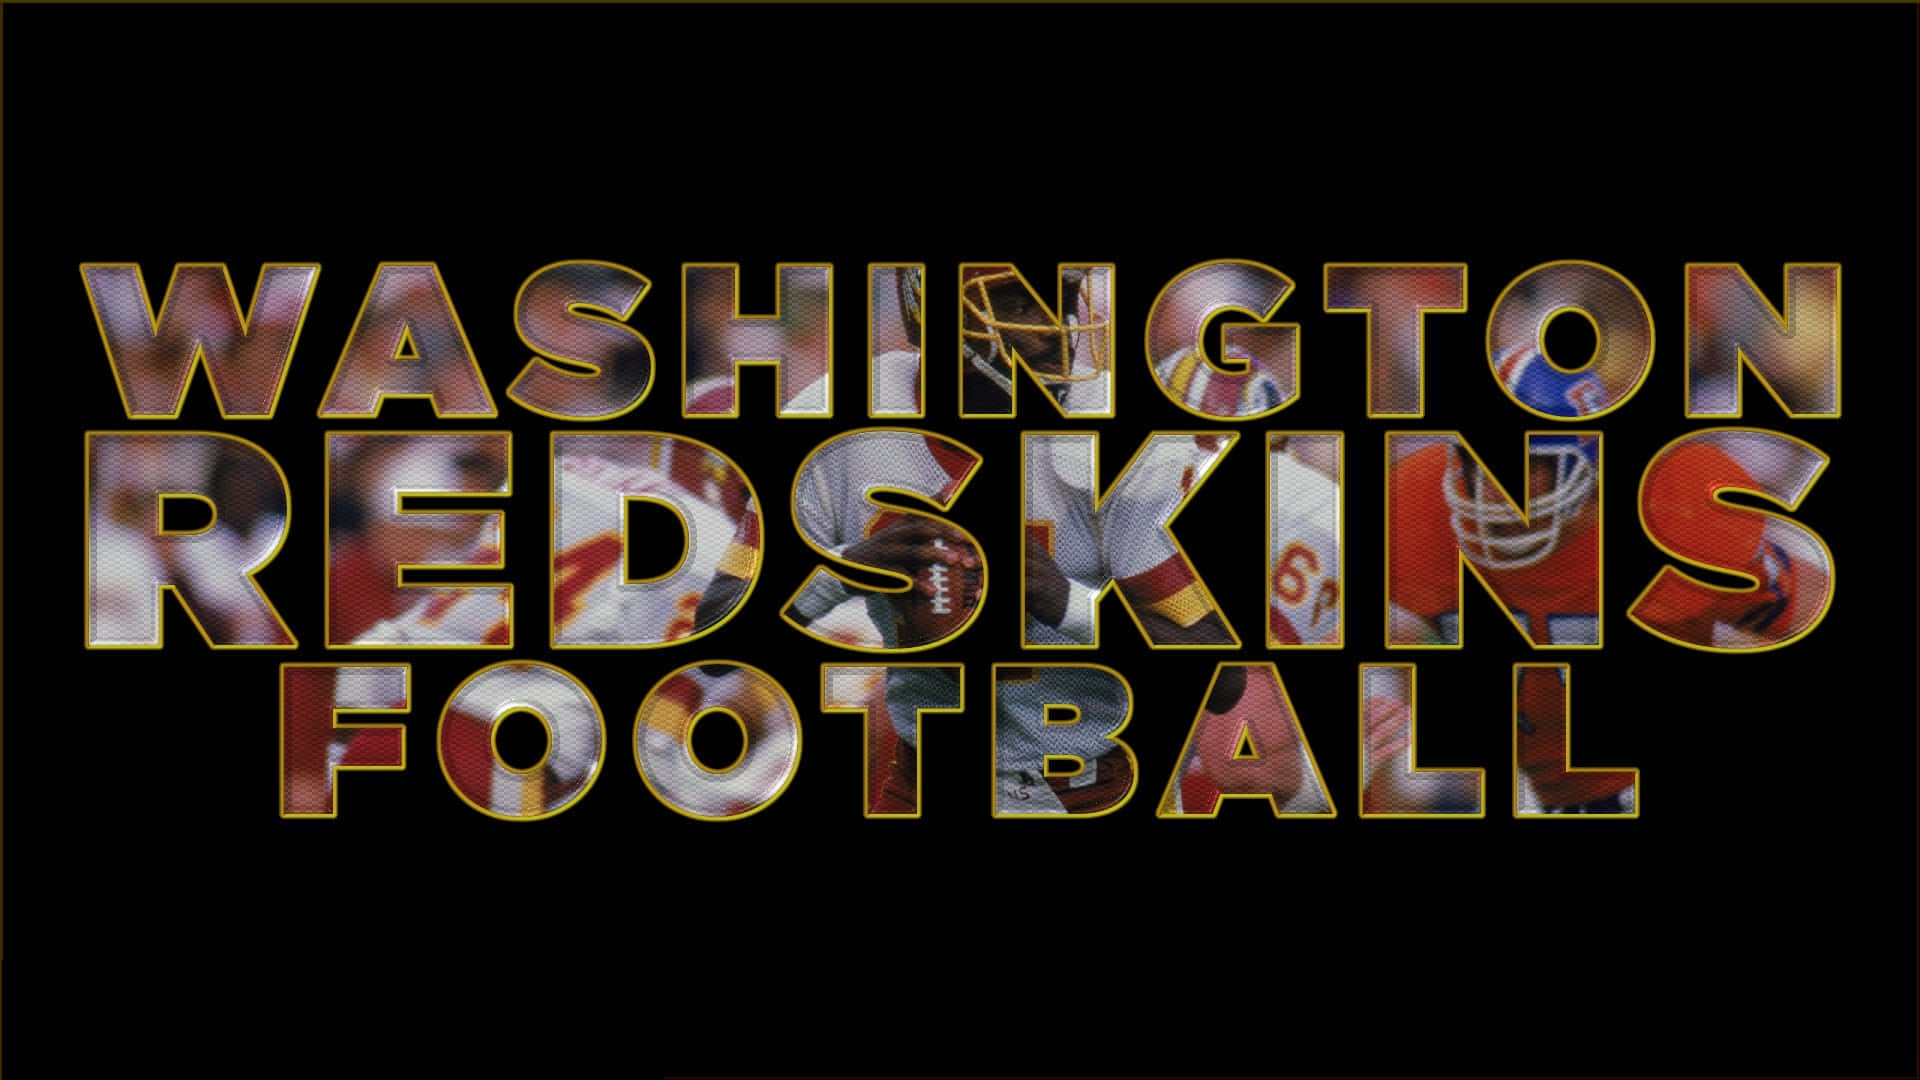 Washington Football Team in action during a thrilling game Wallpaper